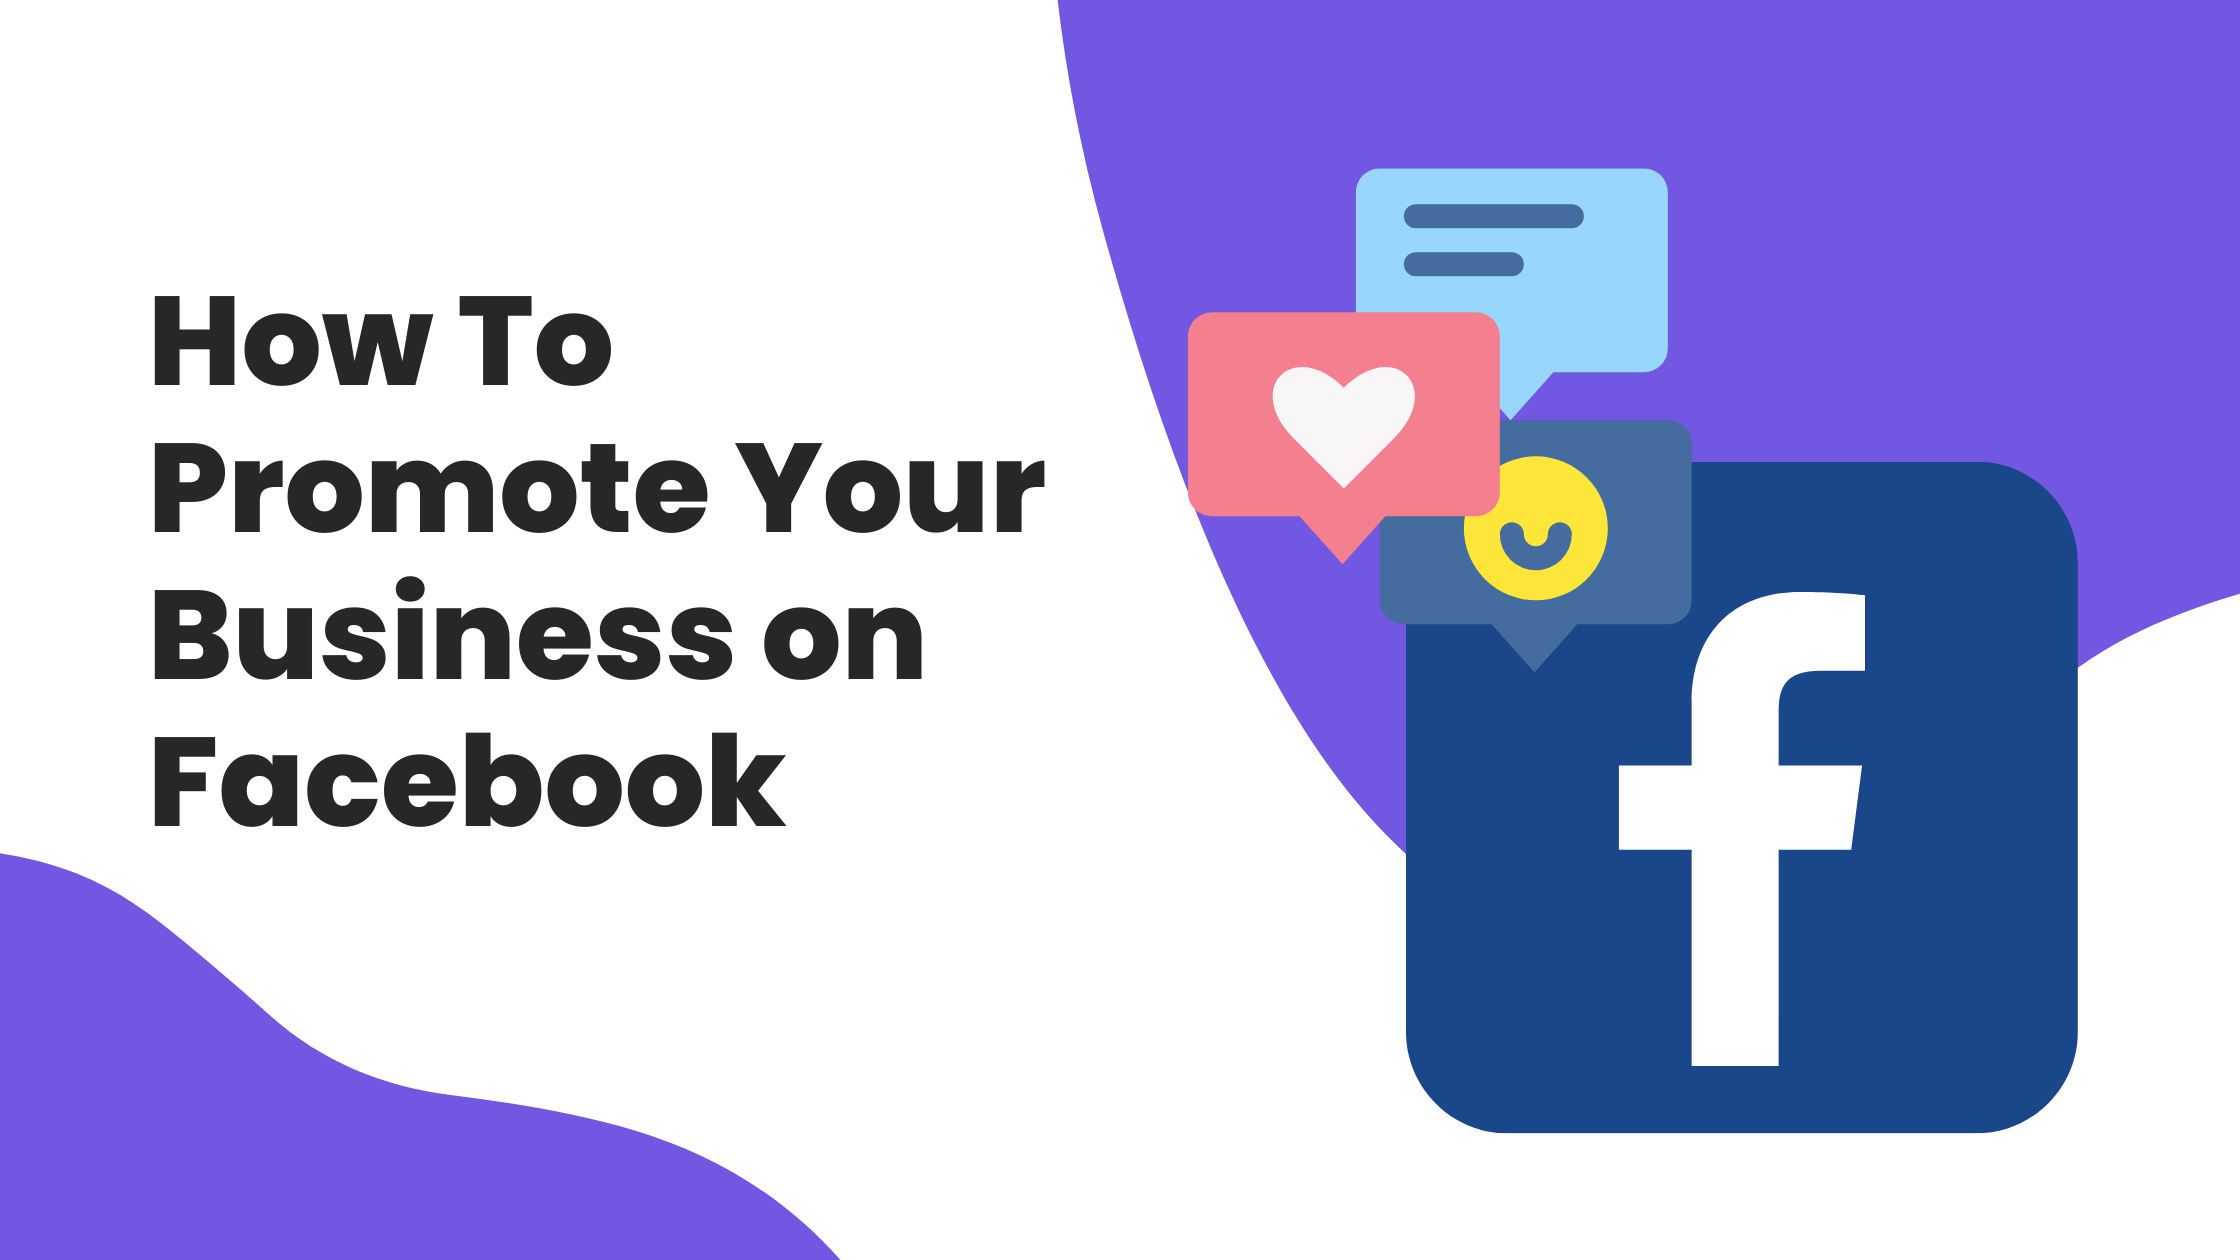 How To Promote Your Business on Facebook